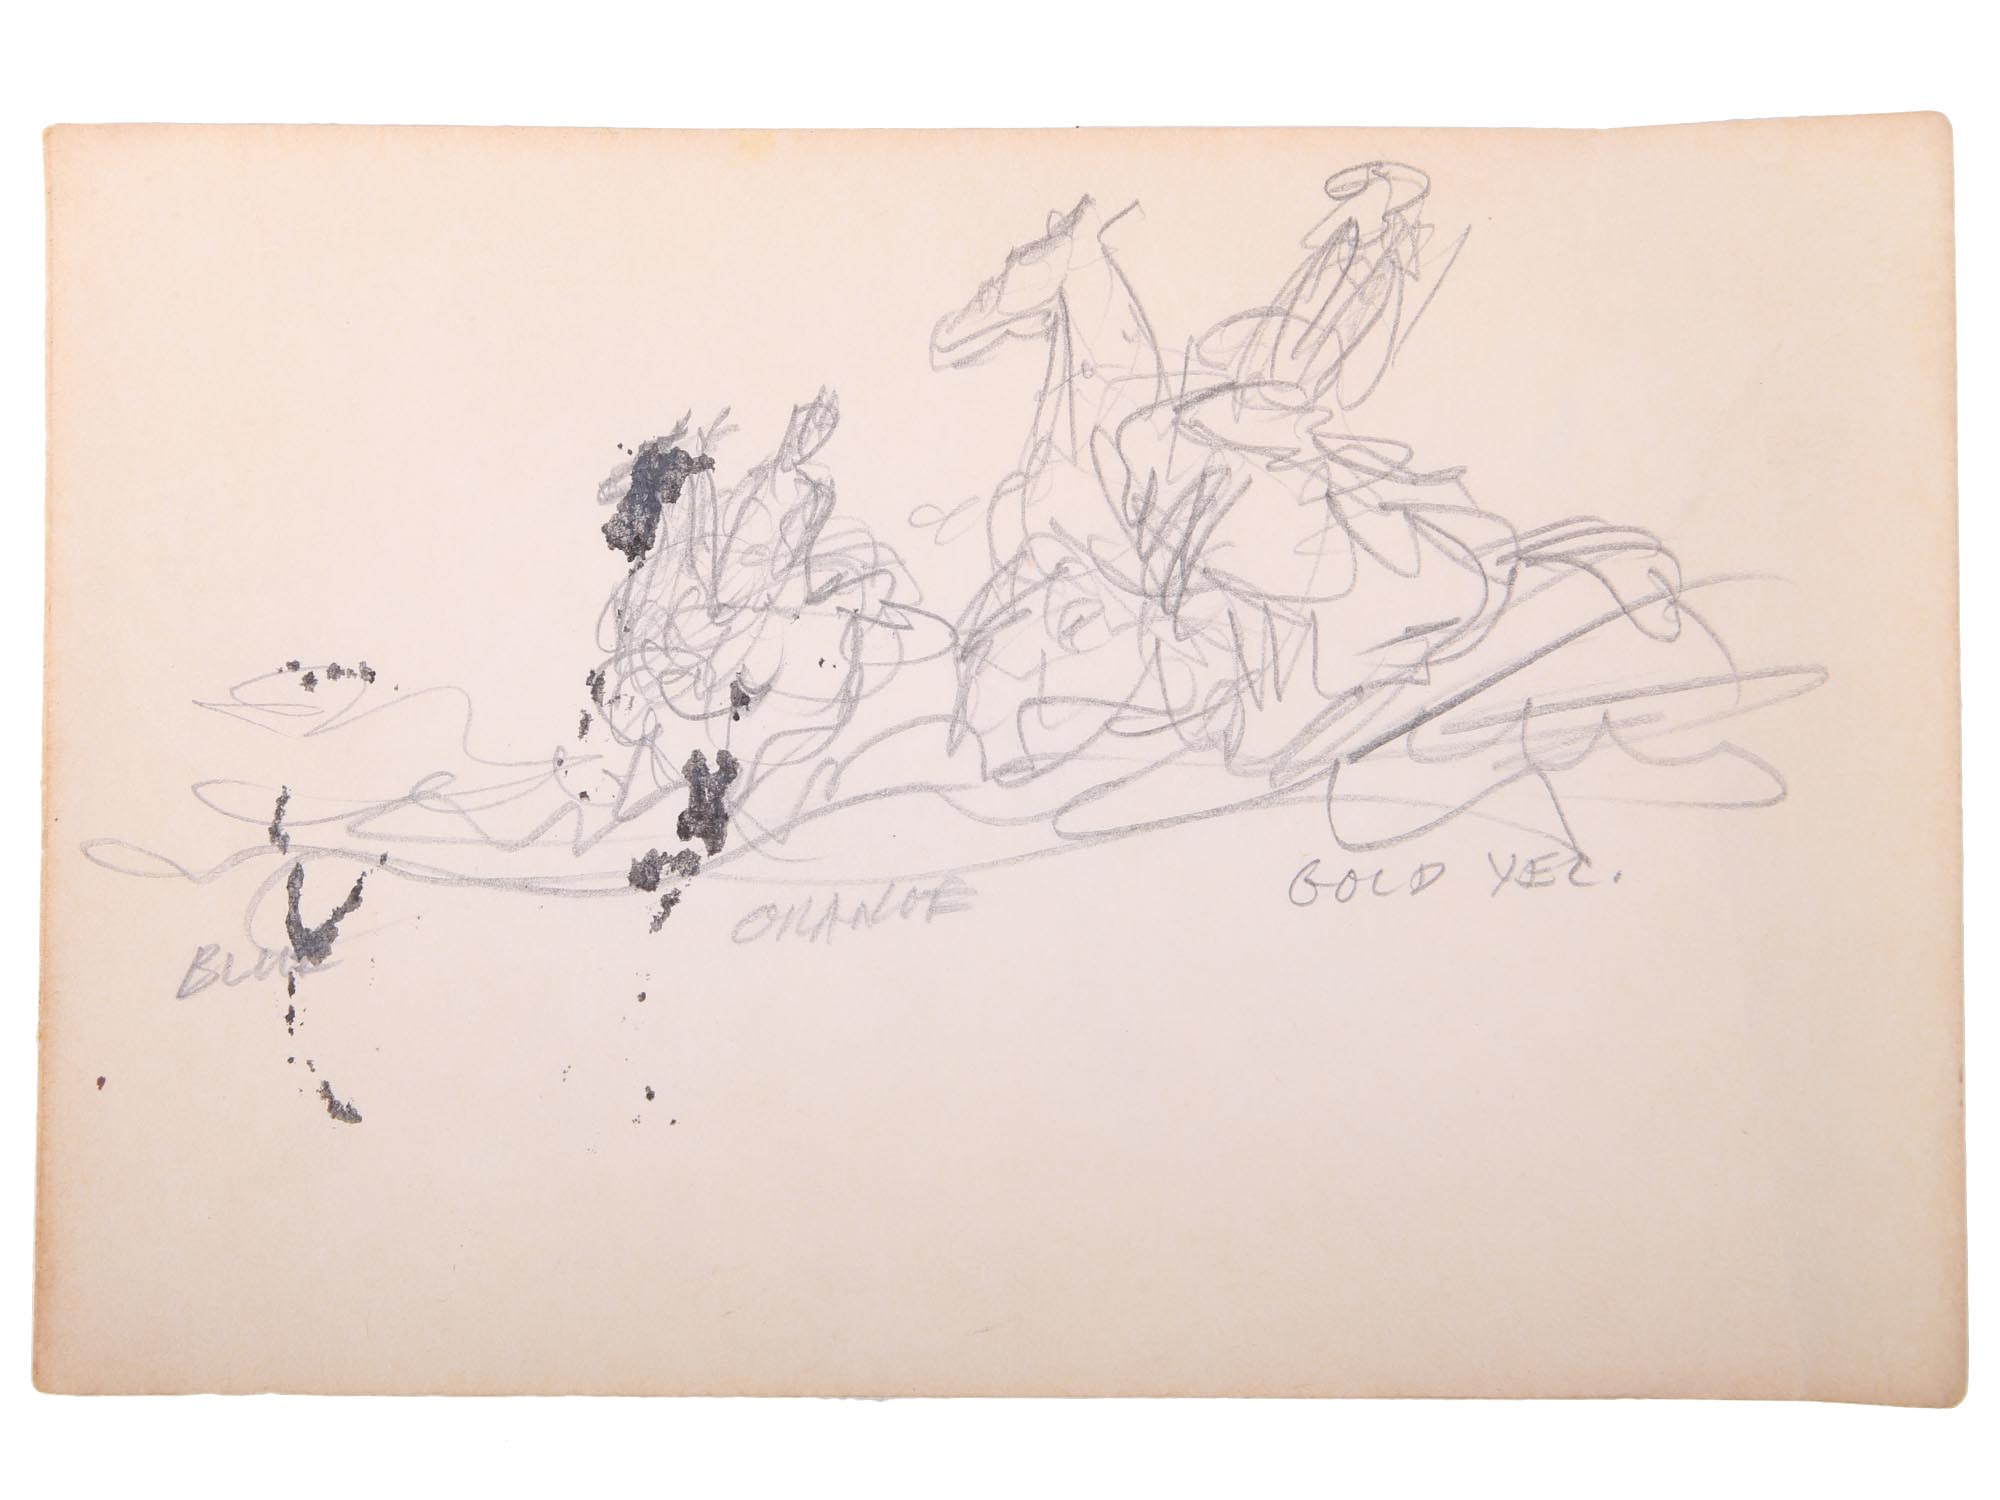 AMERICAN SKETCH DRAWINGS BY WILLIAM FRACCIO PIC-2